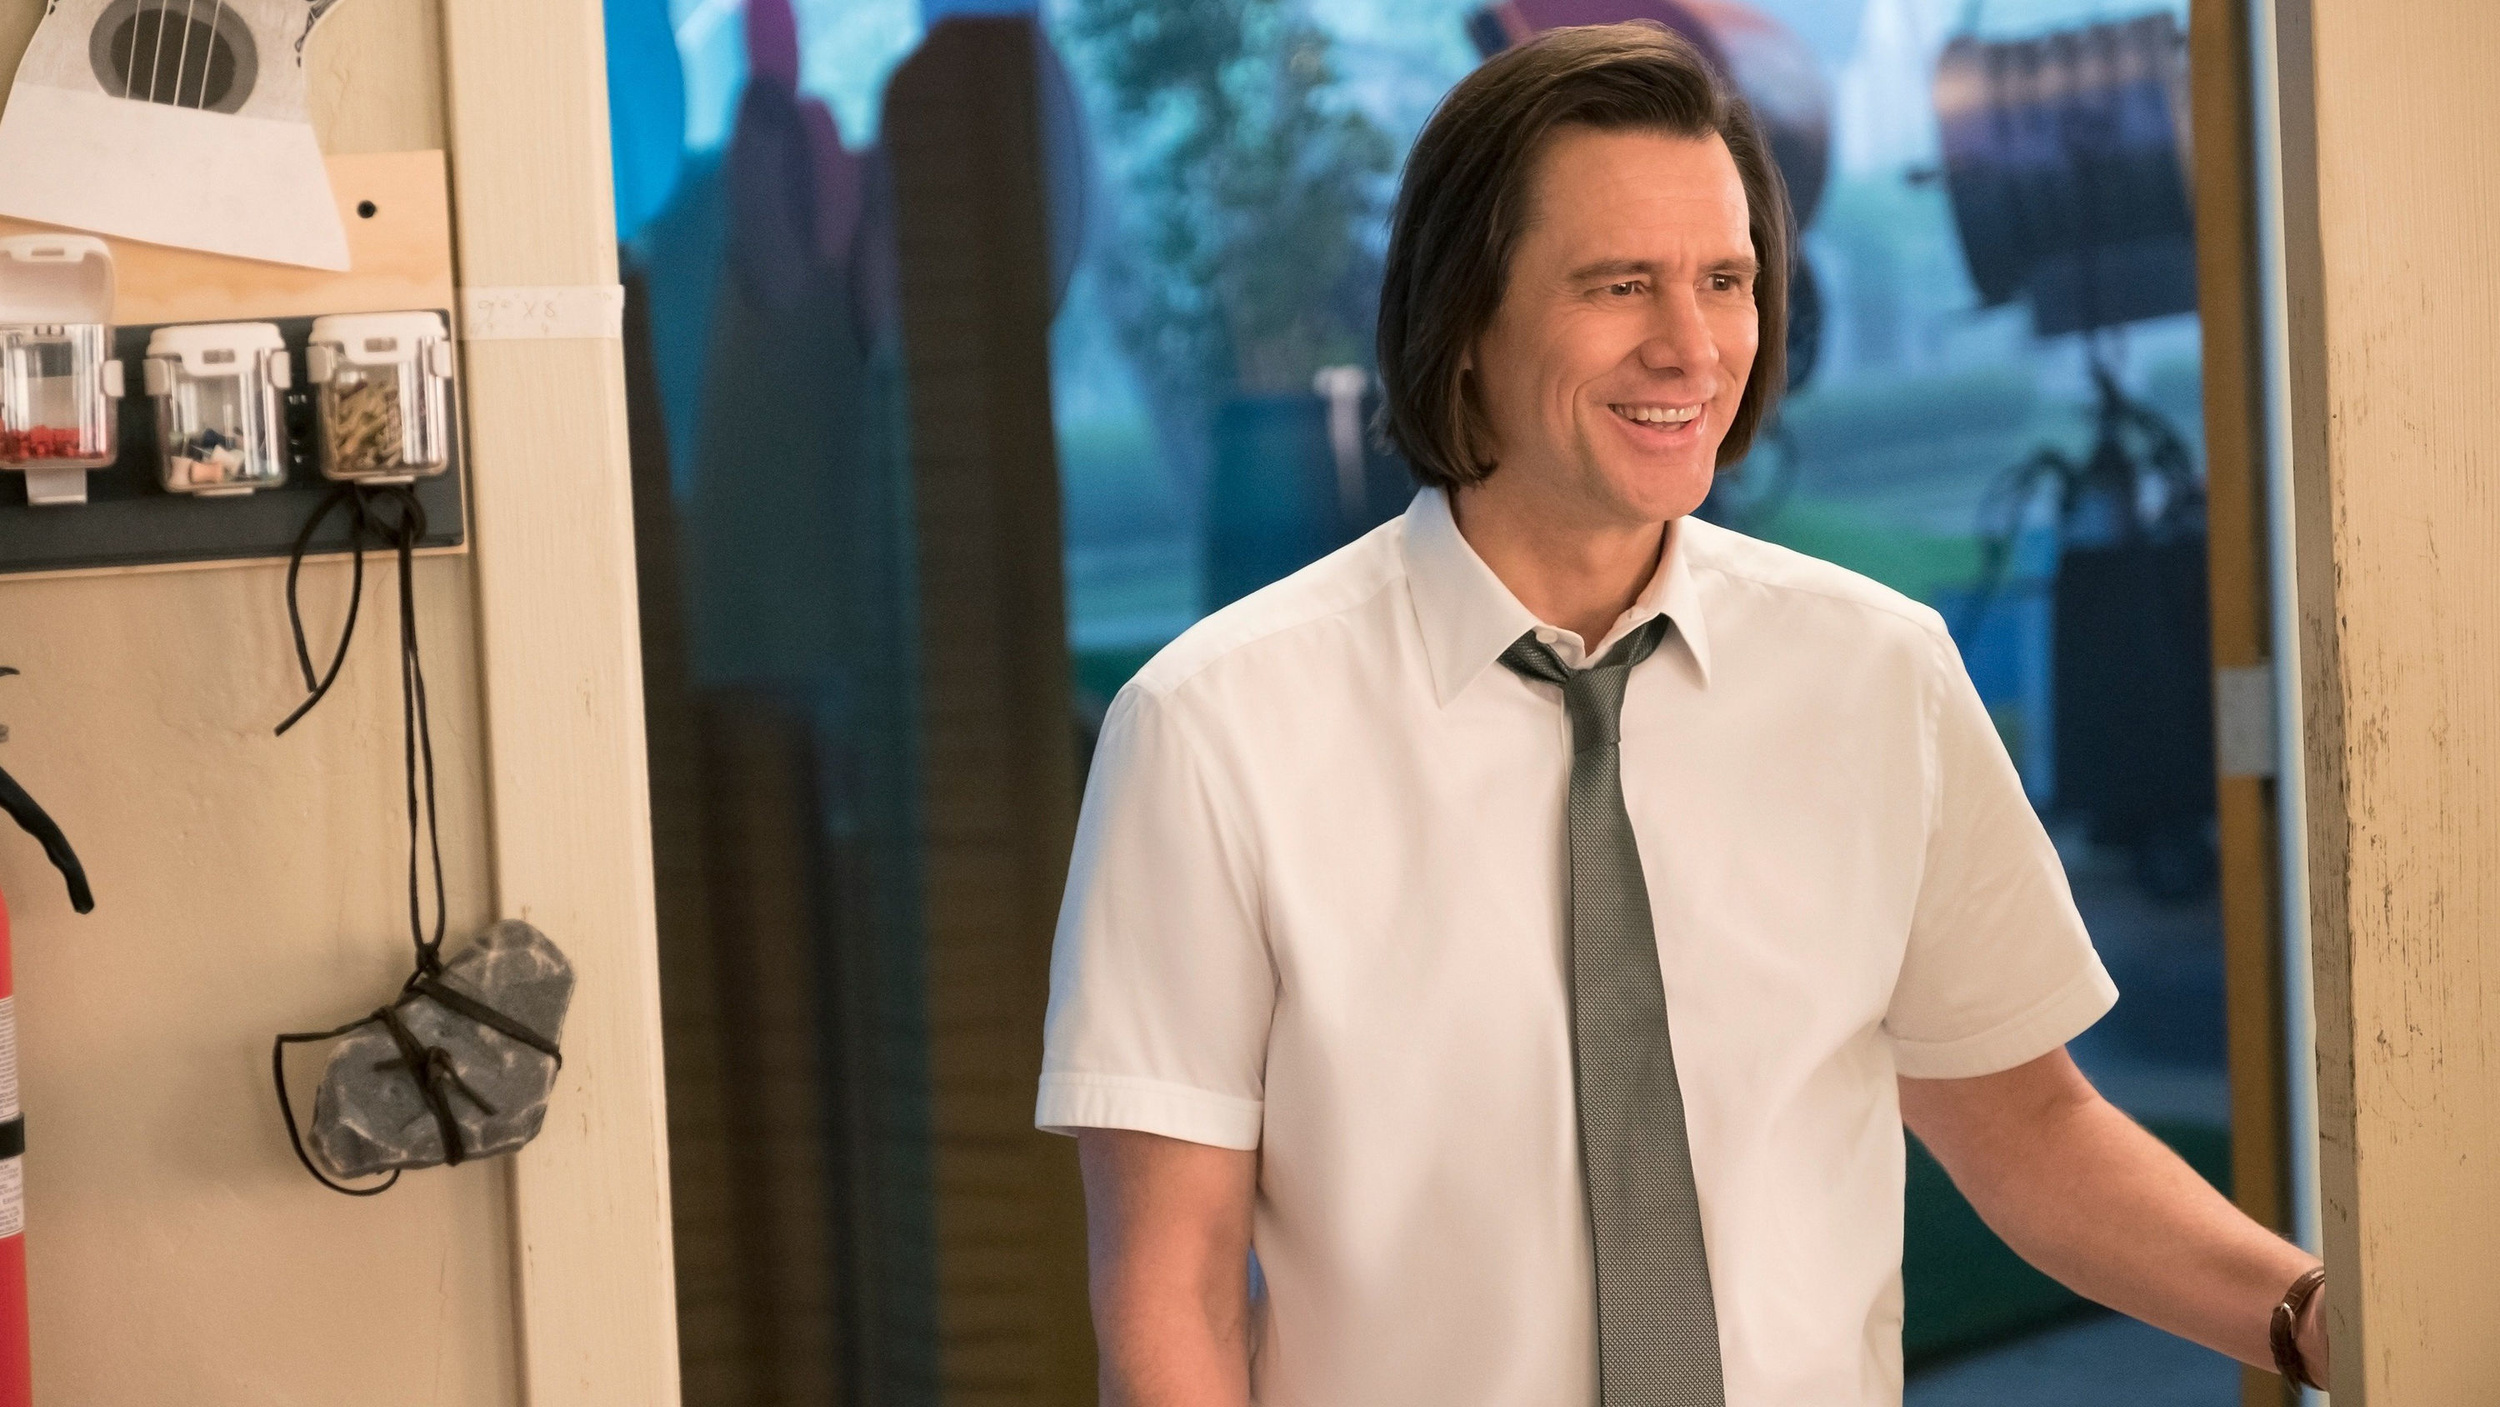 <p>Once one of the top movie stars out there, Carrey’s career took a bit of a dip, and perhaps that’s why he decided to give prestige TV a shot. The only problem? His show <em>Kidding</em> didn’t necessarily take off. Now, he’s playing Dr. Robotnik in the <em>Sonic the Hedgehog</em> movies, where at least he seems to be having fun.</p><p>You may also like: <a href='https://www.yardbarker.com/entertainment/articles/the_20_best_young_actors_working_in_hollywood_120823/s1__38828724'>The 20 best young actors working in Hollywood</a></p>